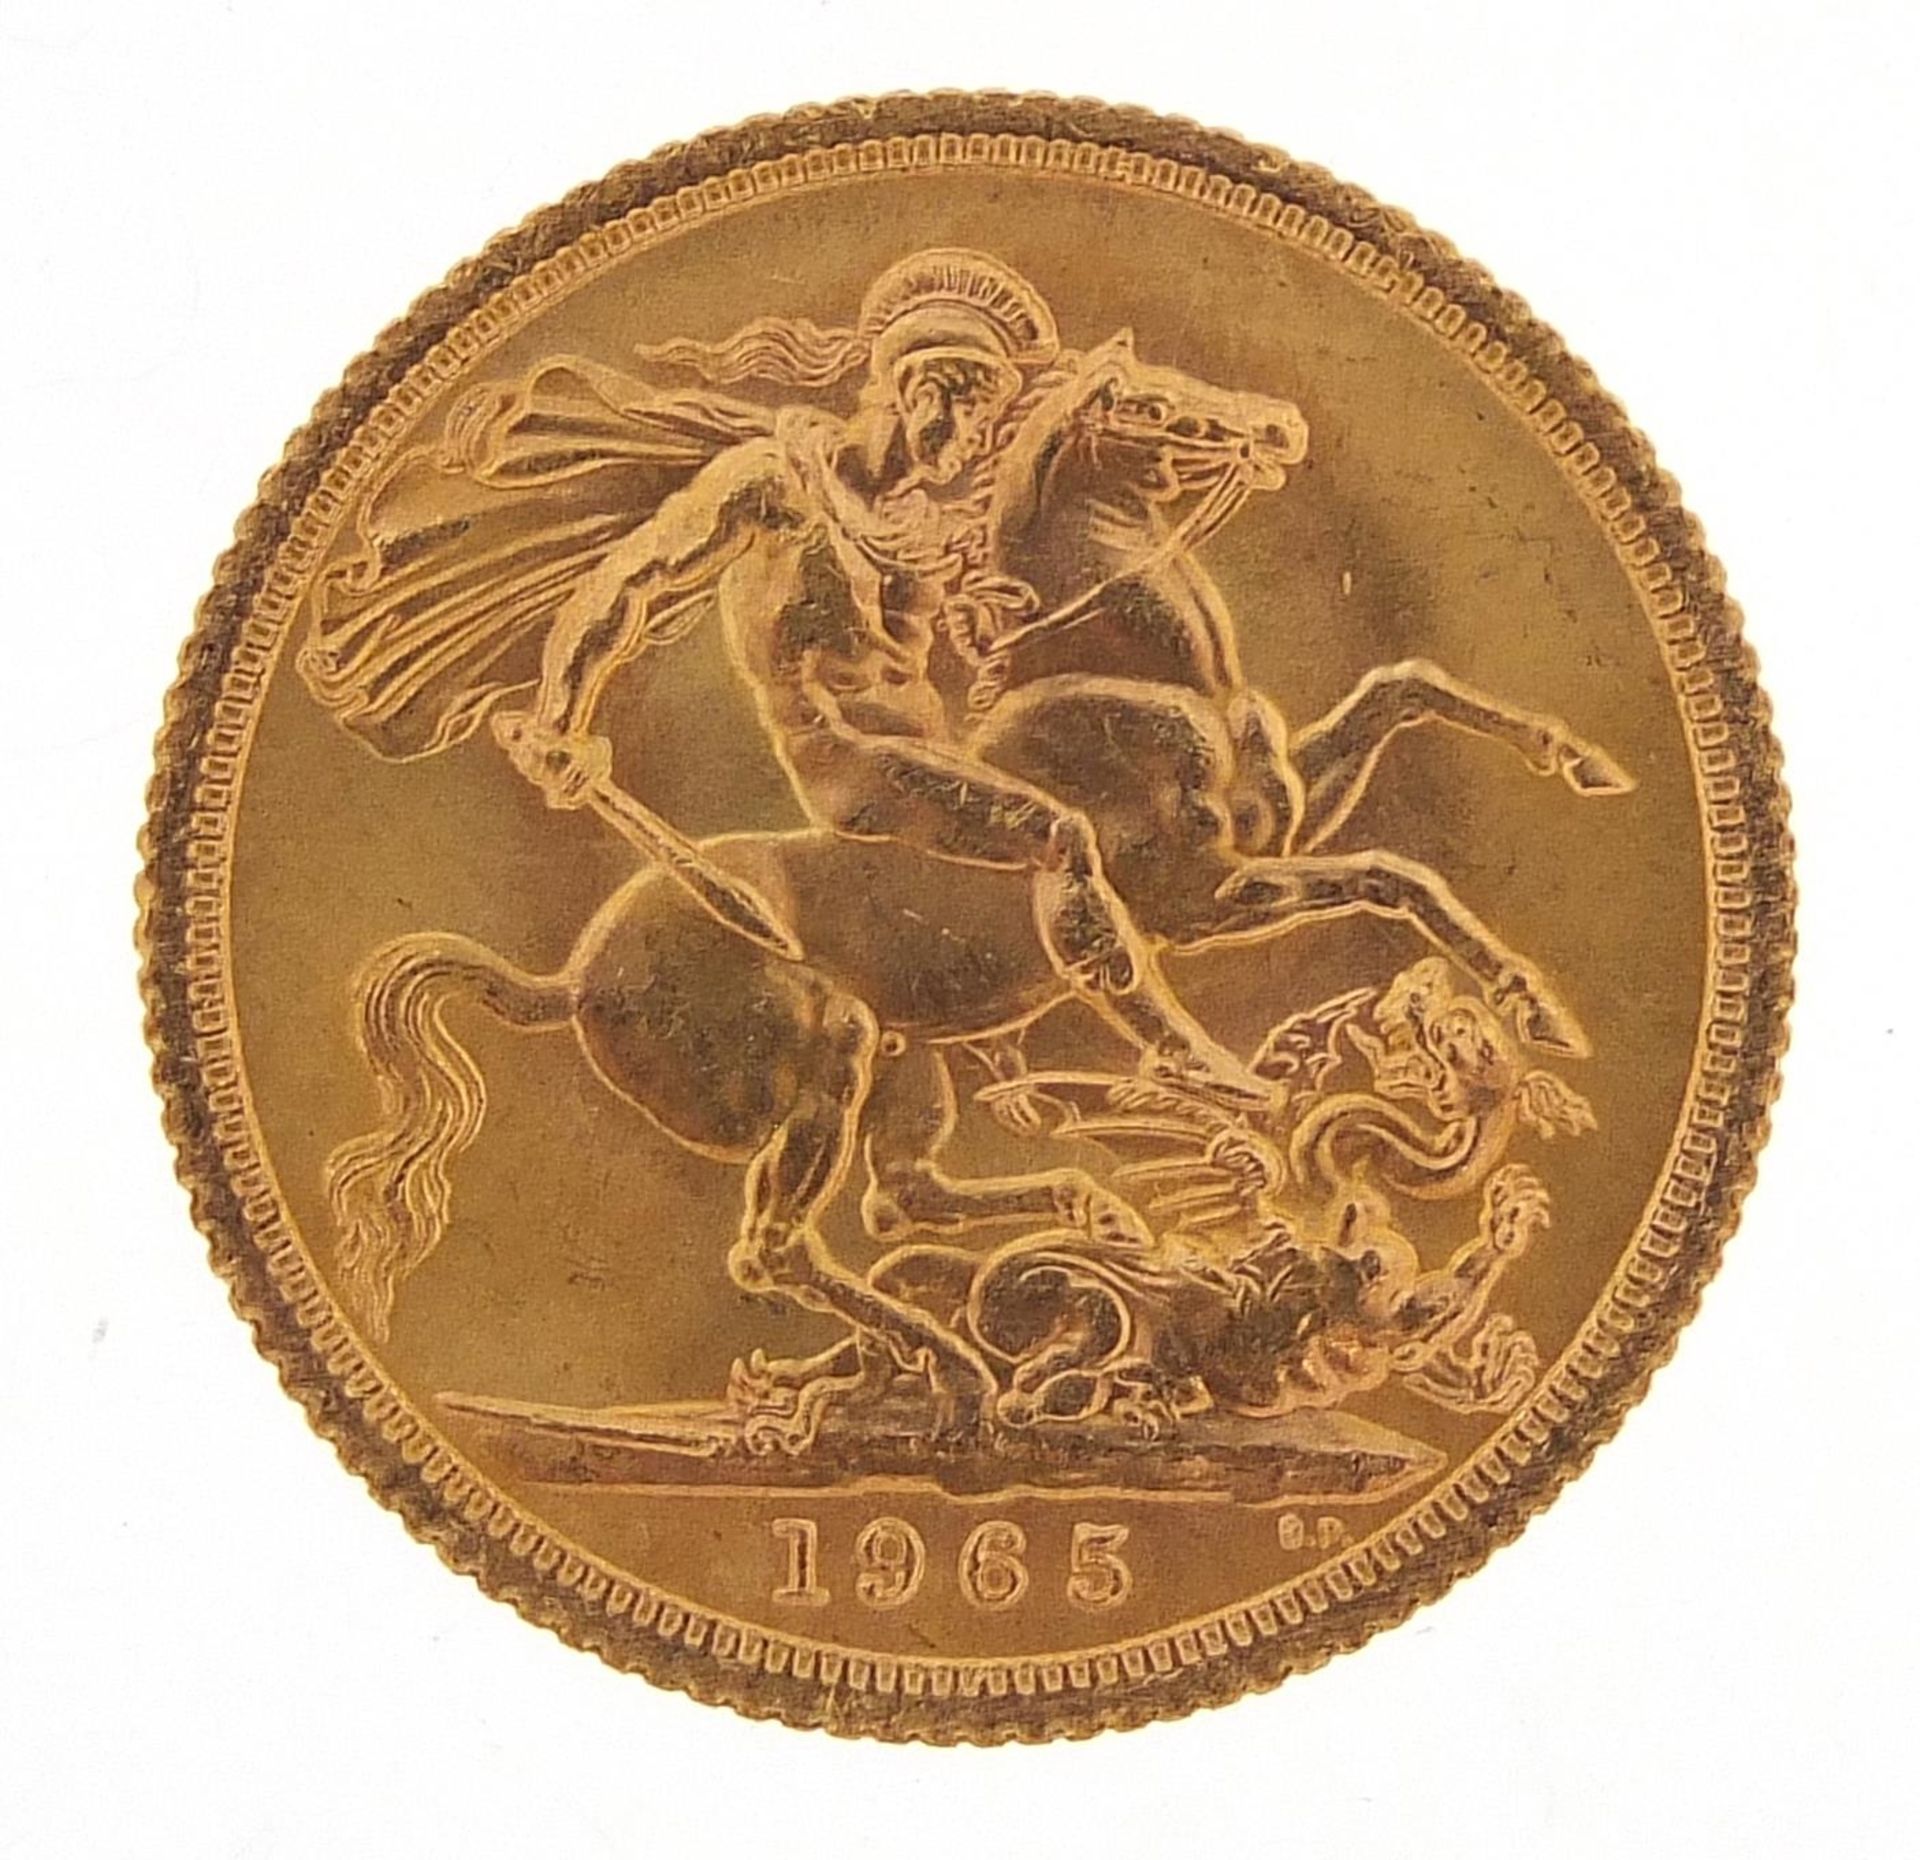 Elizabeth II 1965 gold sovereign - this lot is sold without buyer's premium